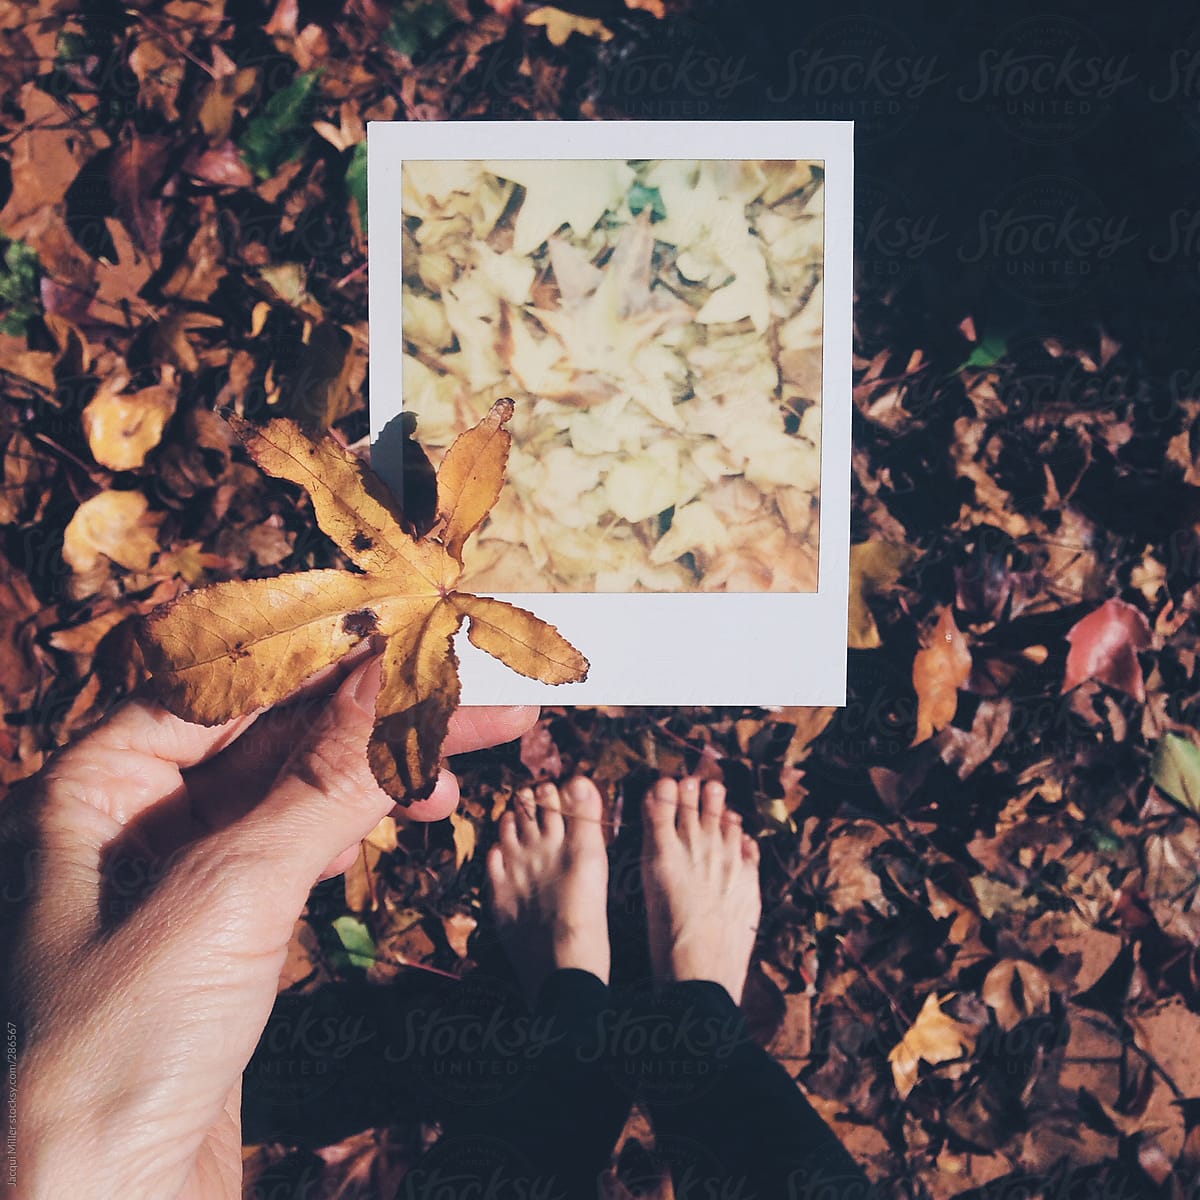 Woman with bare feet holding an autumn leaf and a polaroid of autumn leaves outdoors